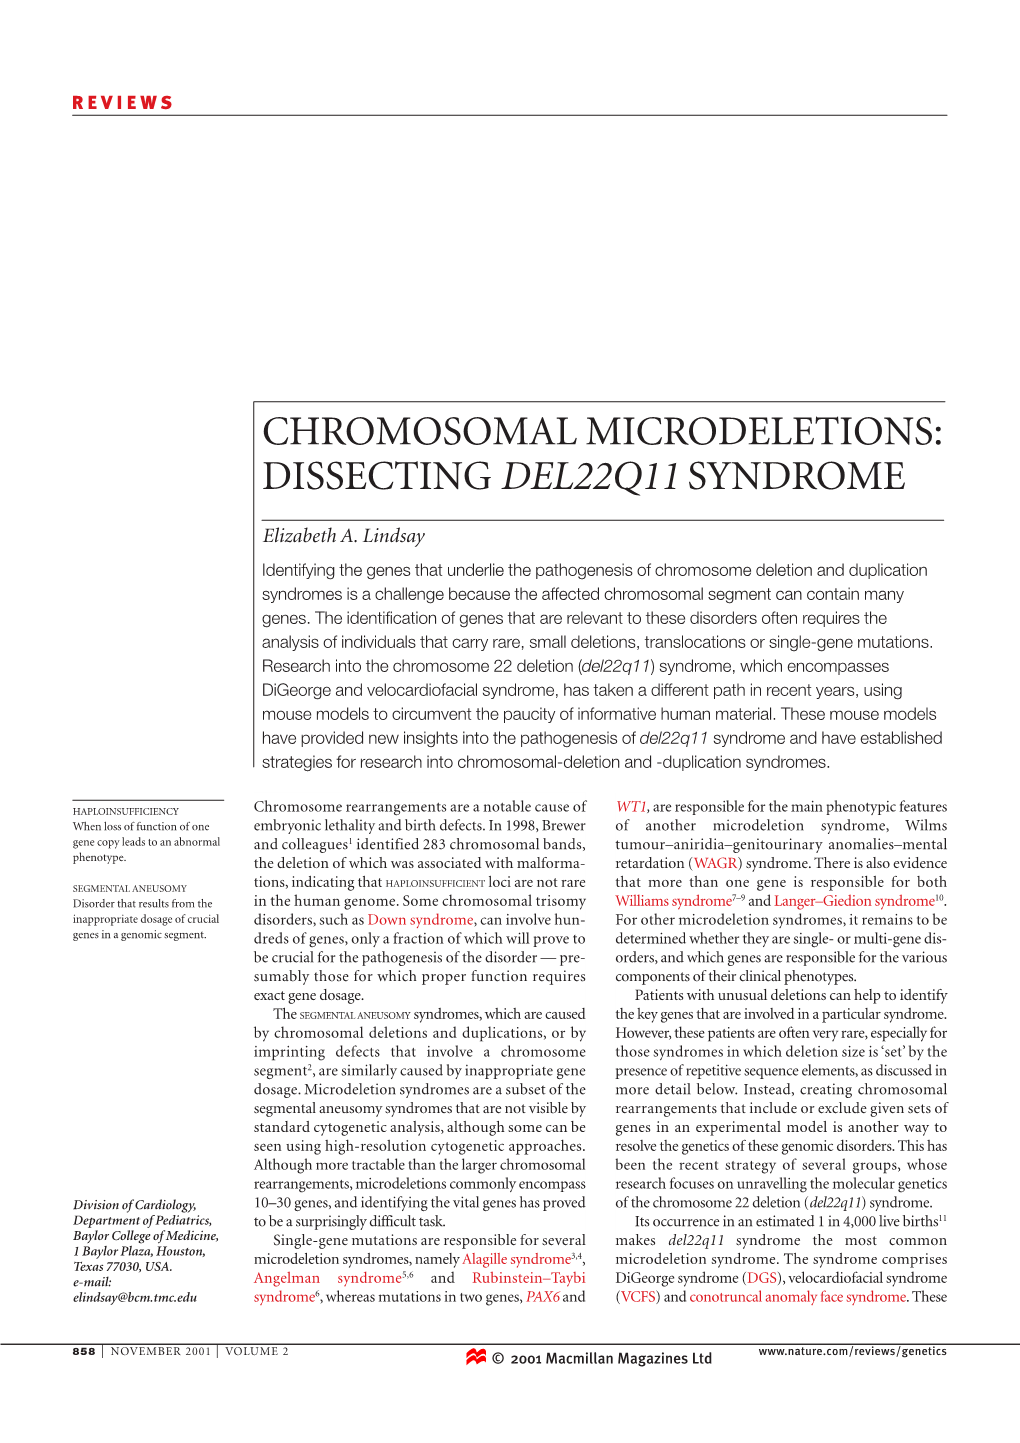 Chromosomal Microdeletions: Dissecting Del22q11 Syndrome